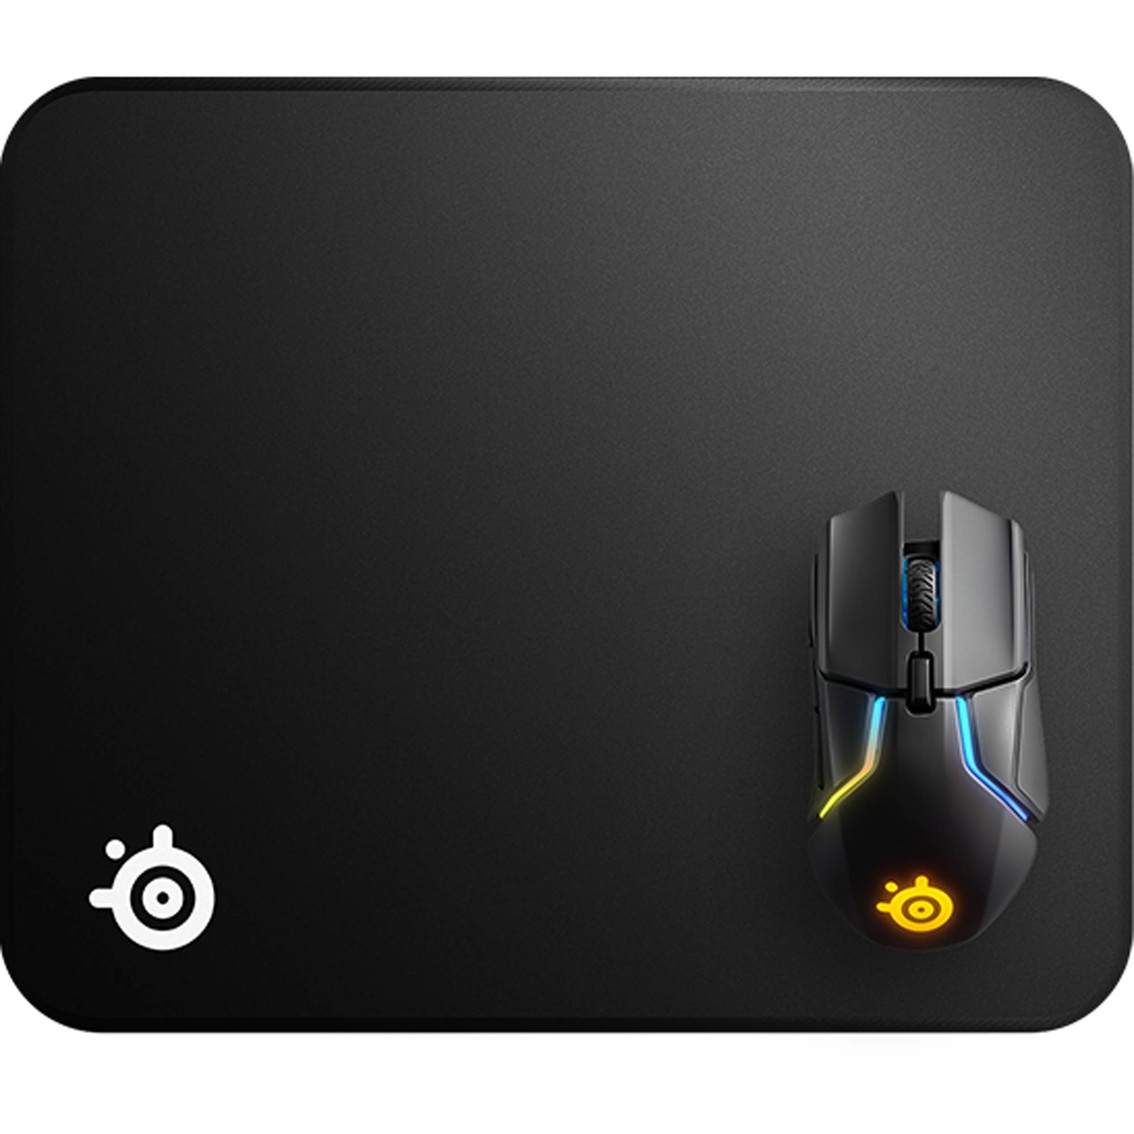 Steelseries Qck Edge Large Gaming Surface - Image 2 of 4